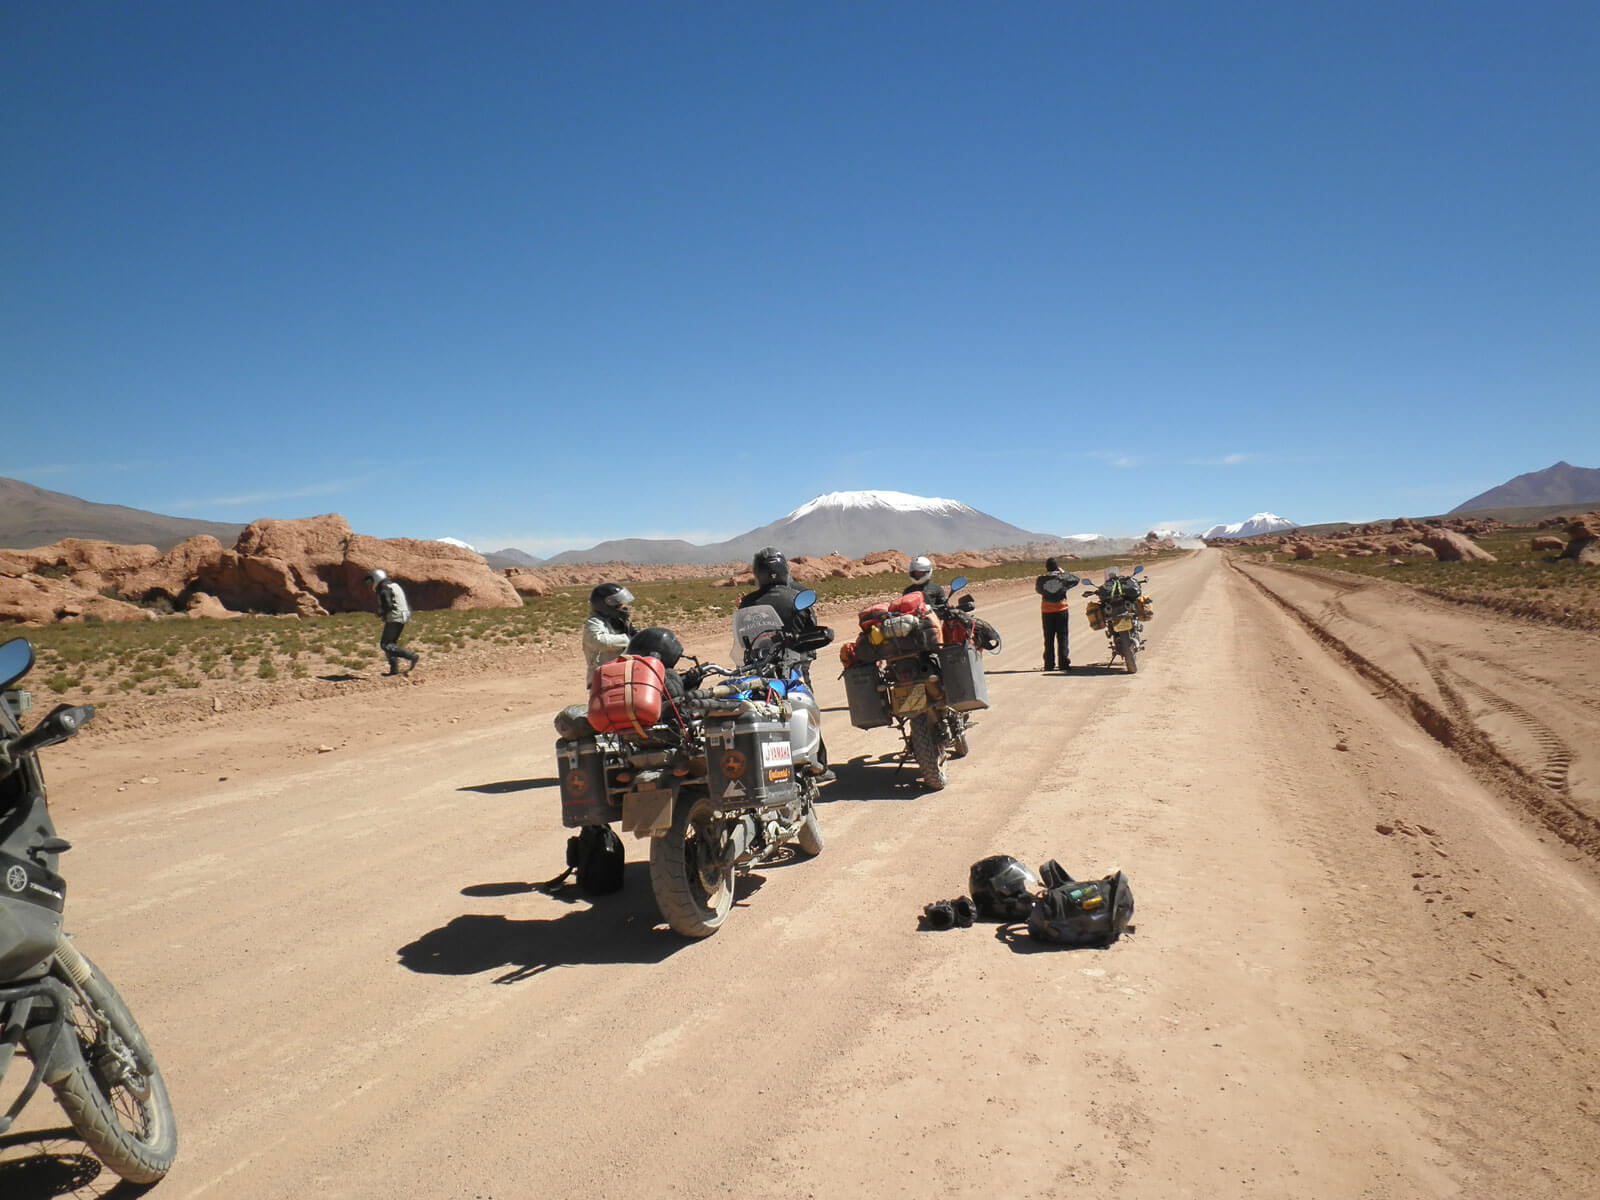 Adventure motorcycle riders with motorcycles loaded with gear stopping to look at the scenery on a dirt road on part of the Pan American trip